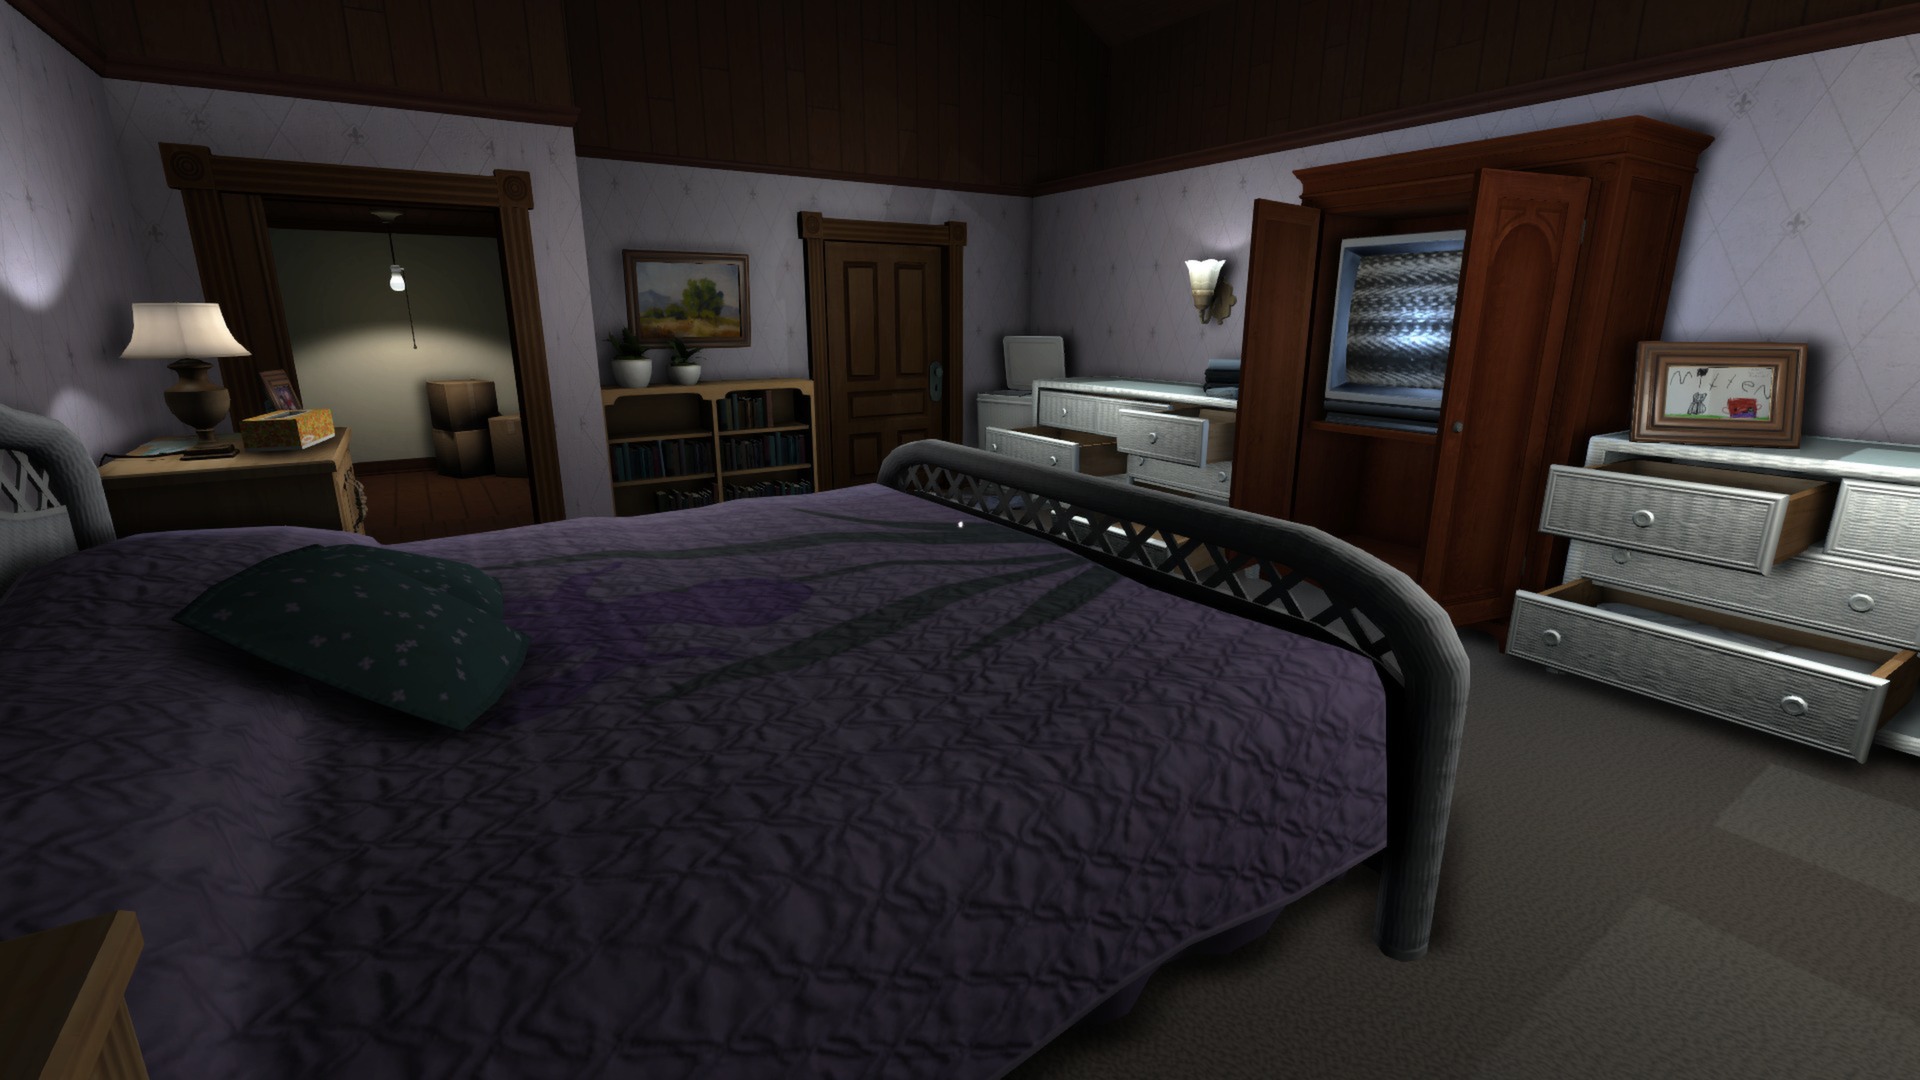 gone home video game